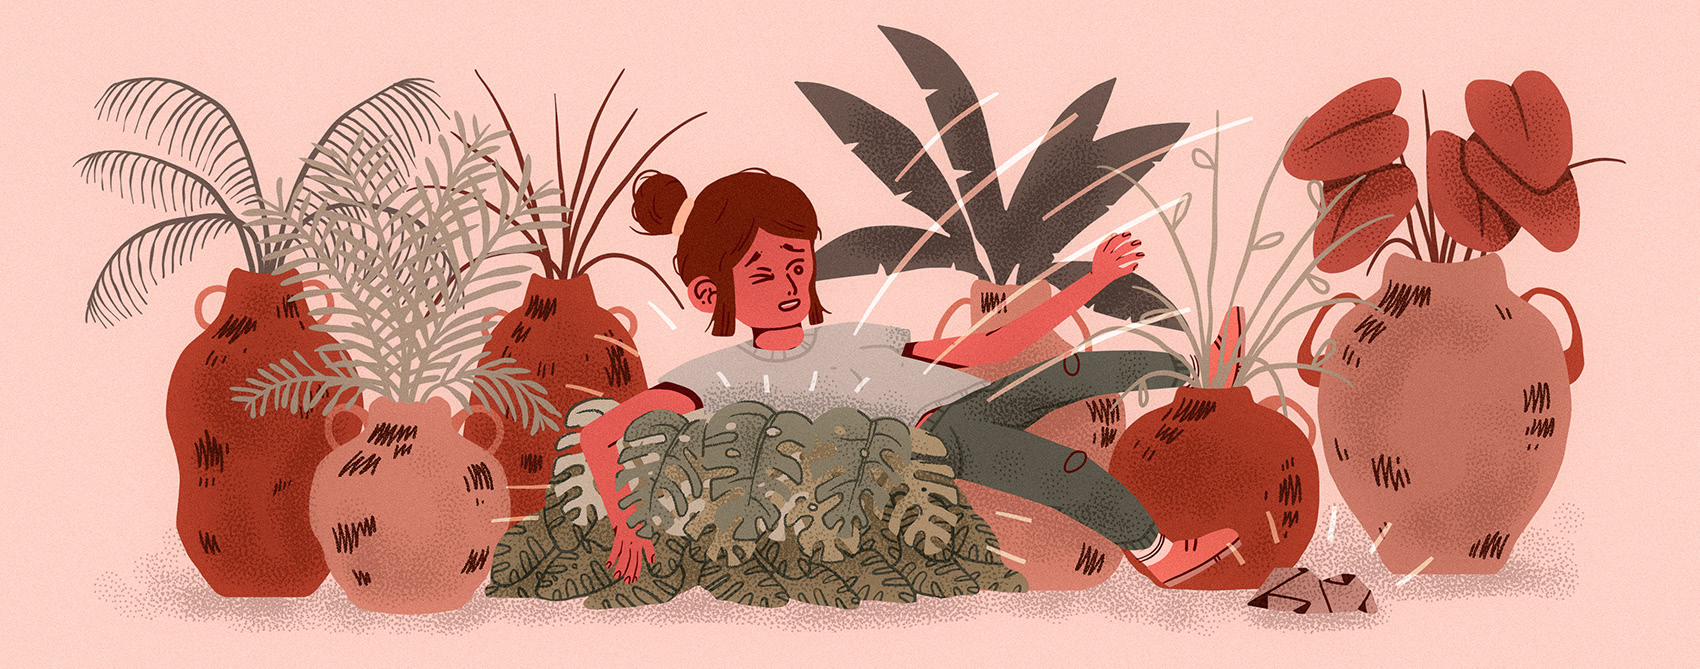 illustration of person surrounded by plants